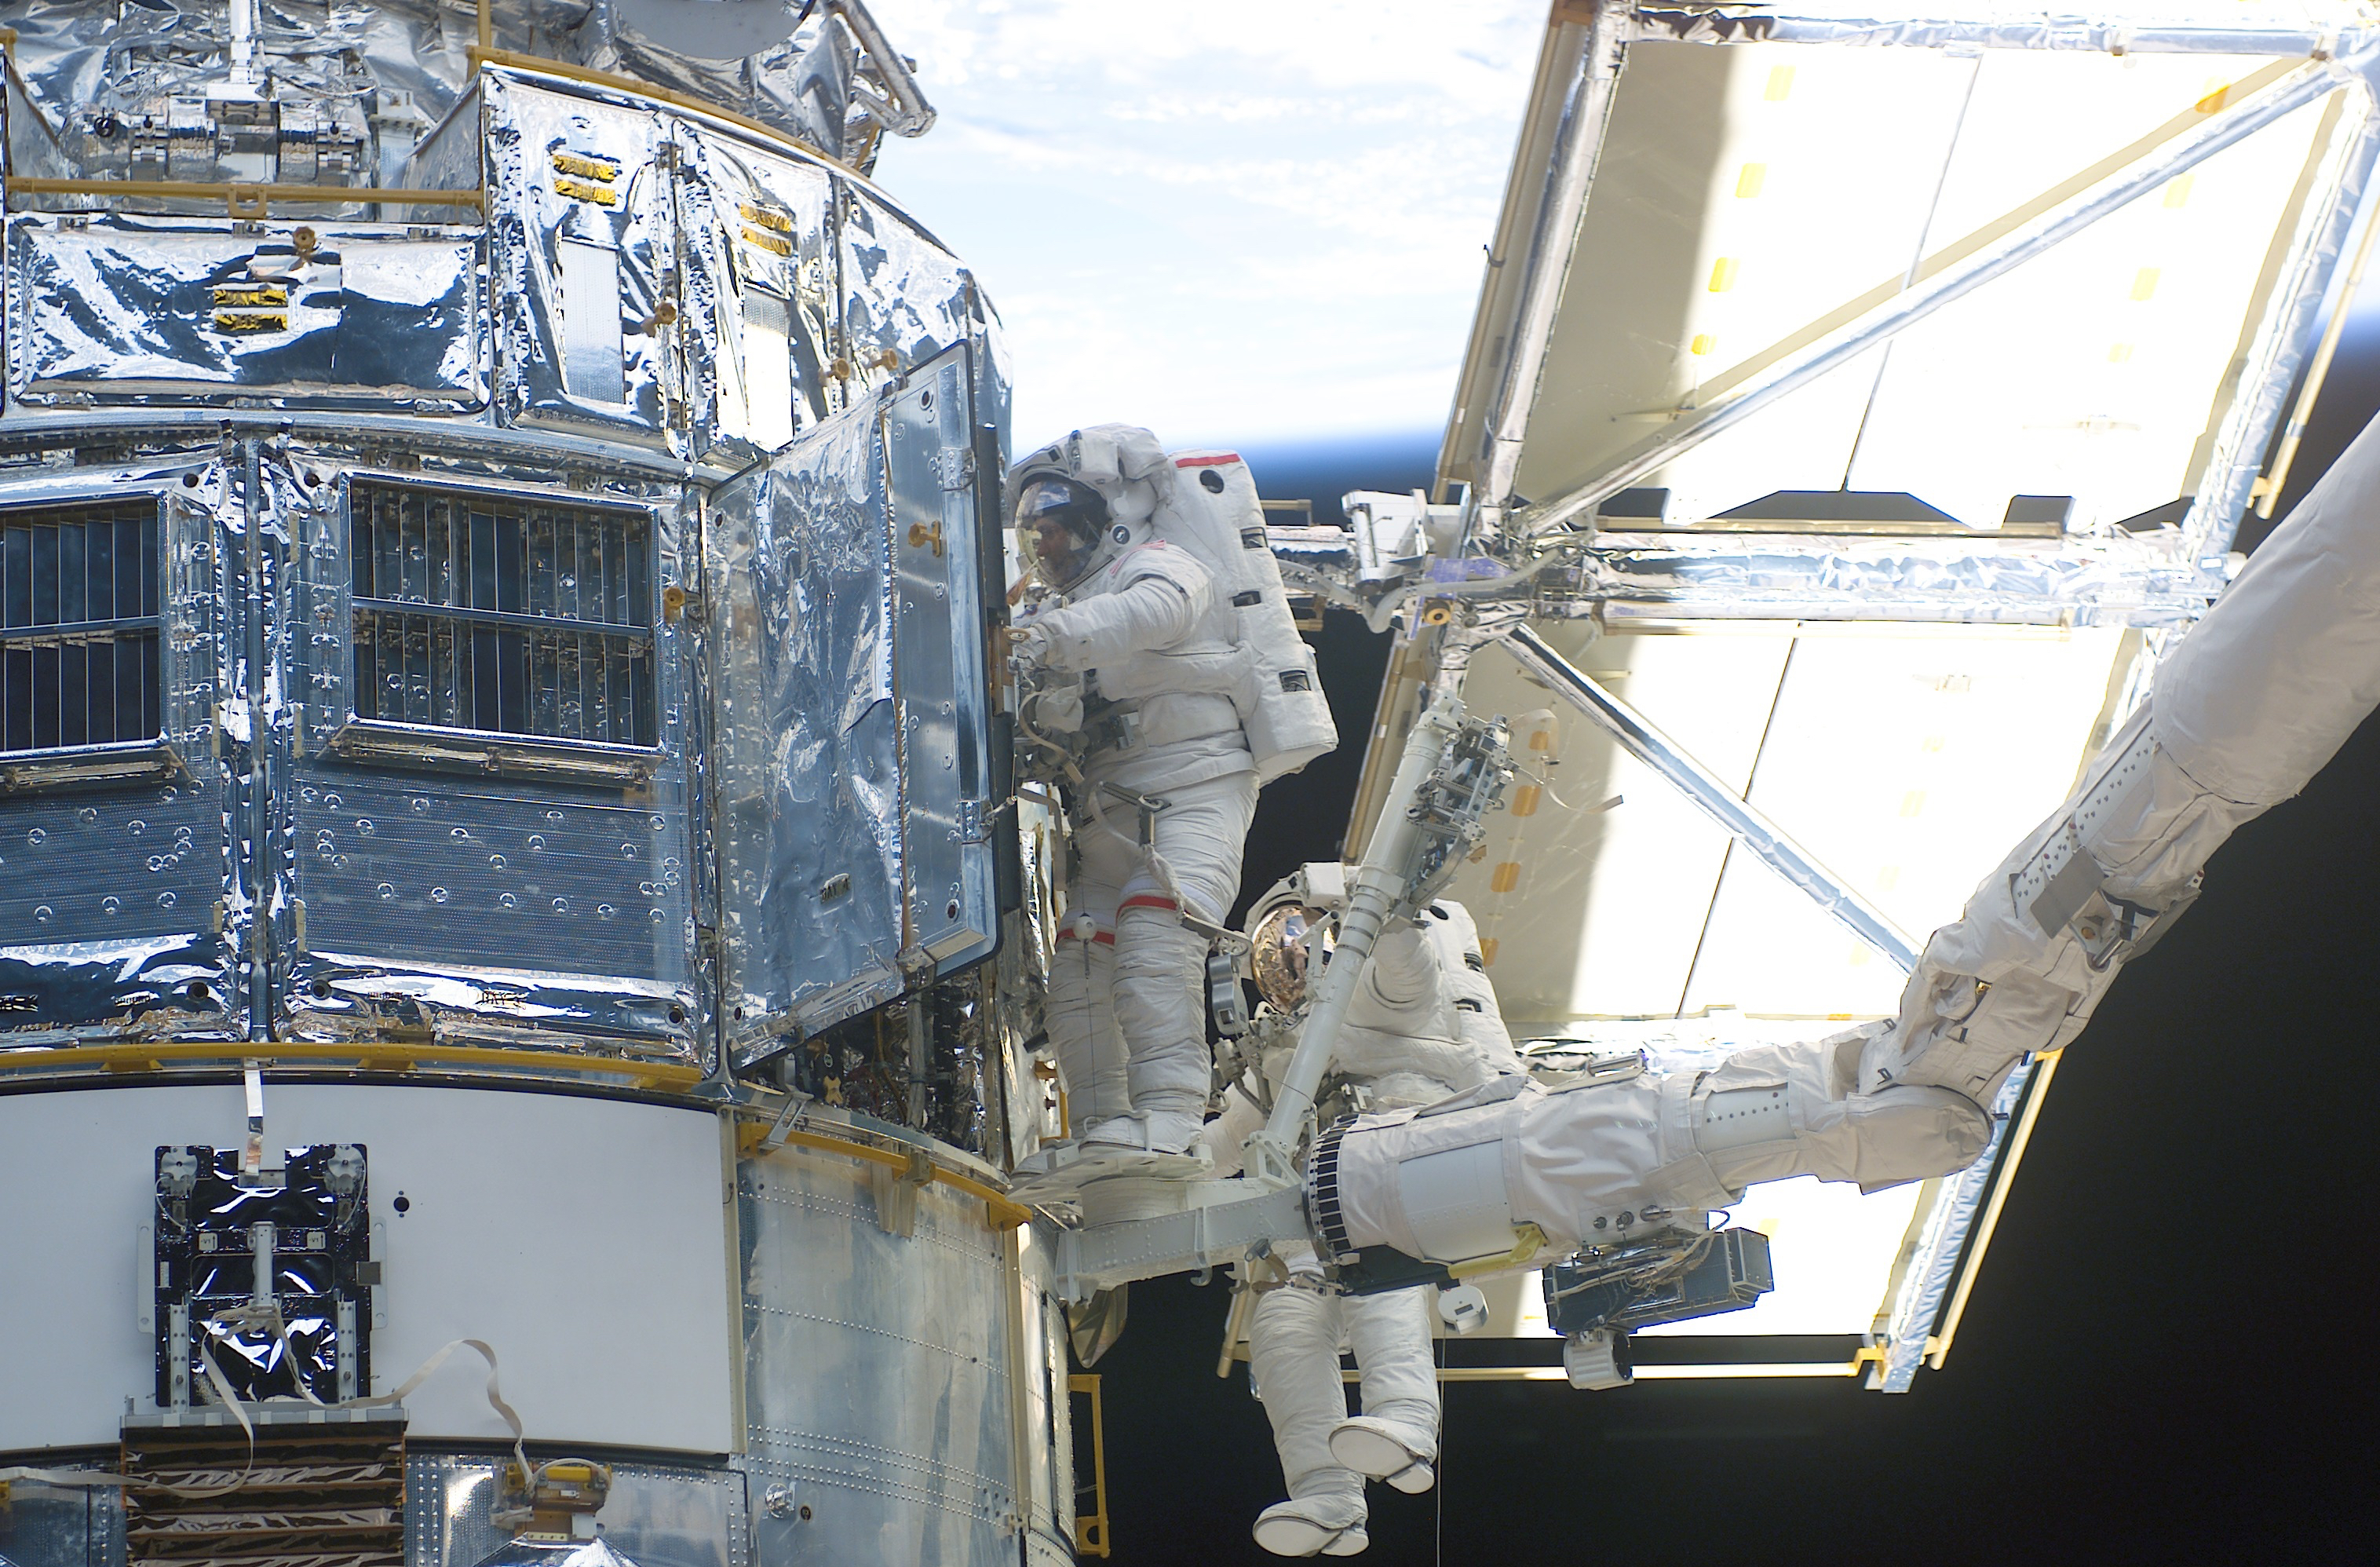 Two astronauts, one positioned on the space shuttle's robotic arm, work on the Hubble Space Telescope. One astronaut peers into an open door on the telescope. The telescope's solar array is clearly visible to the right.